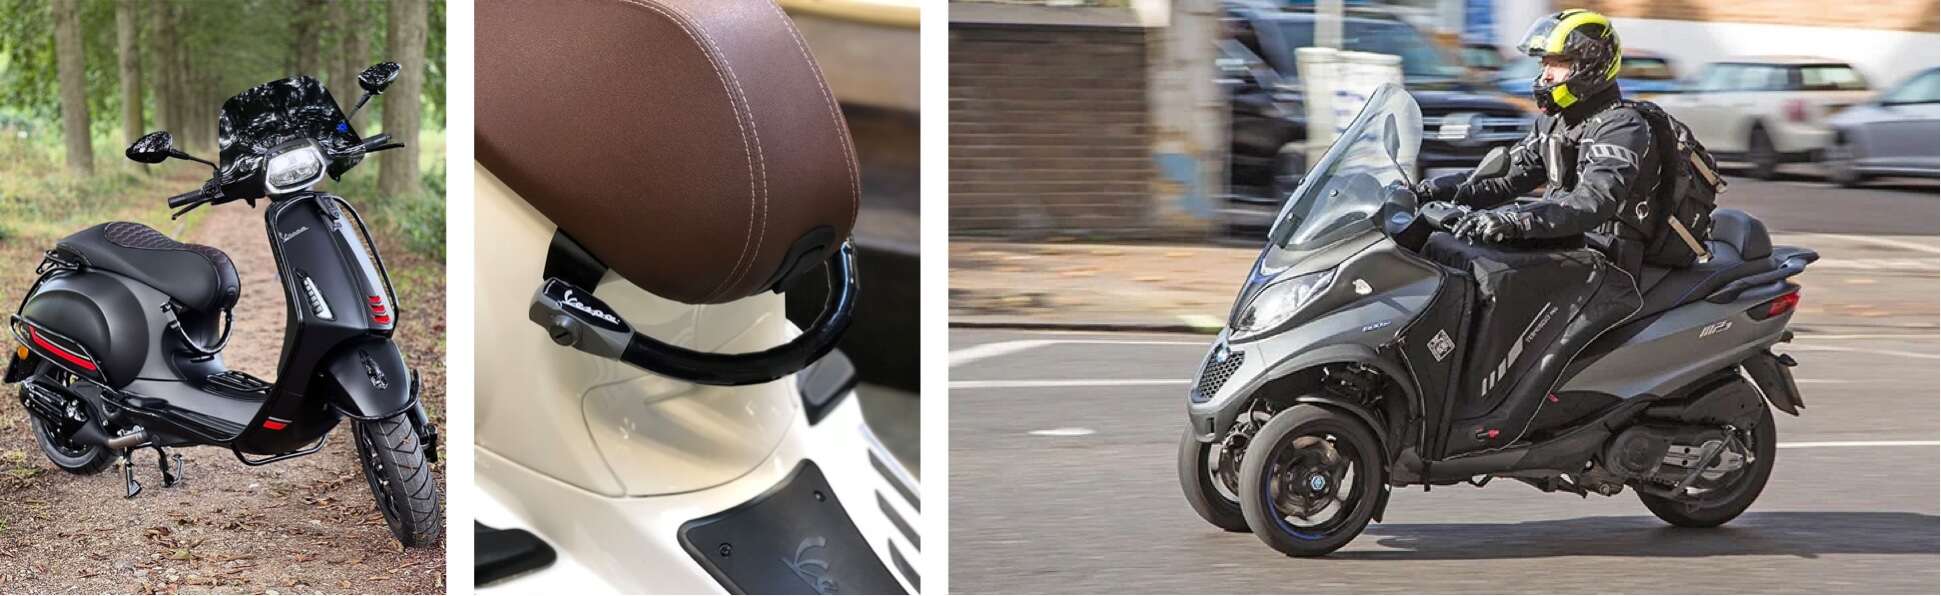 Accessoires scooter 